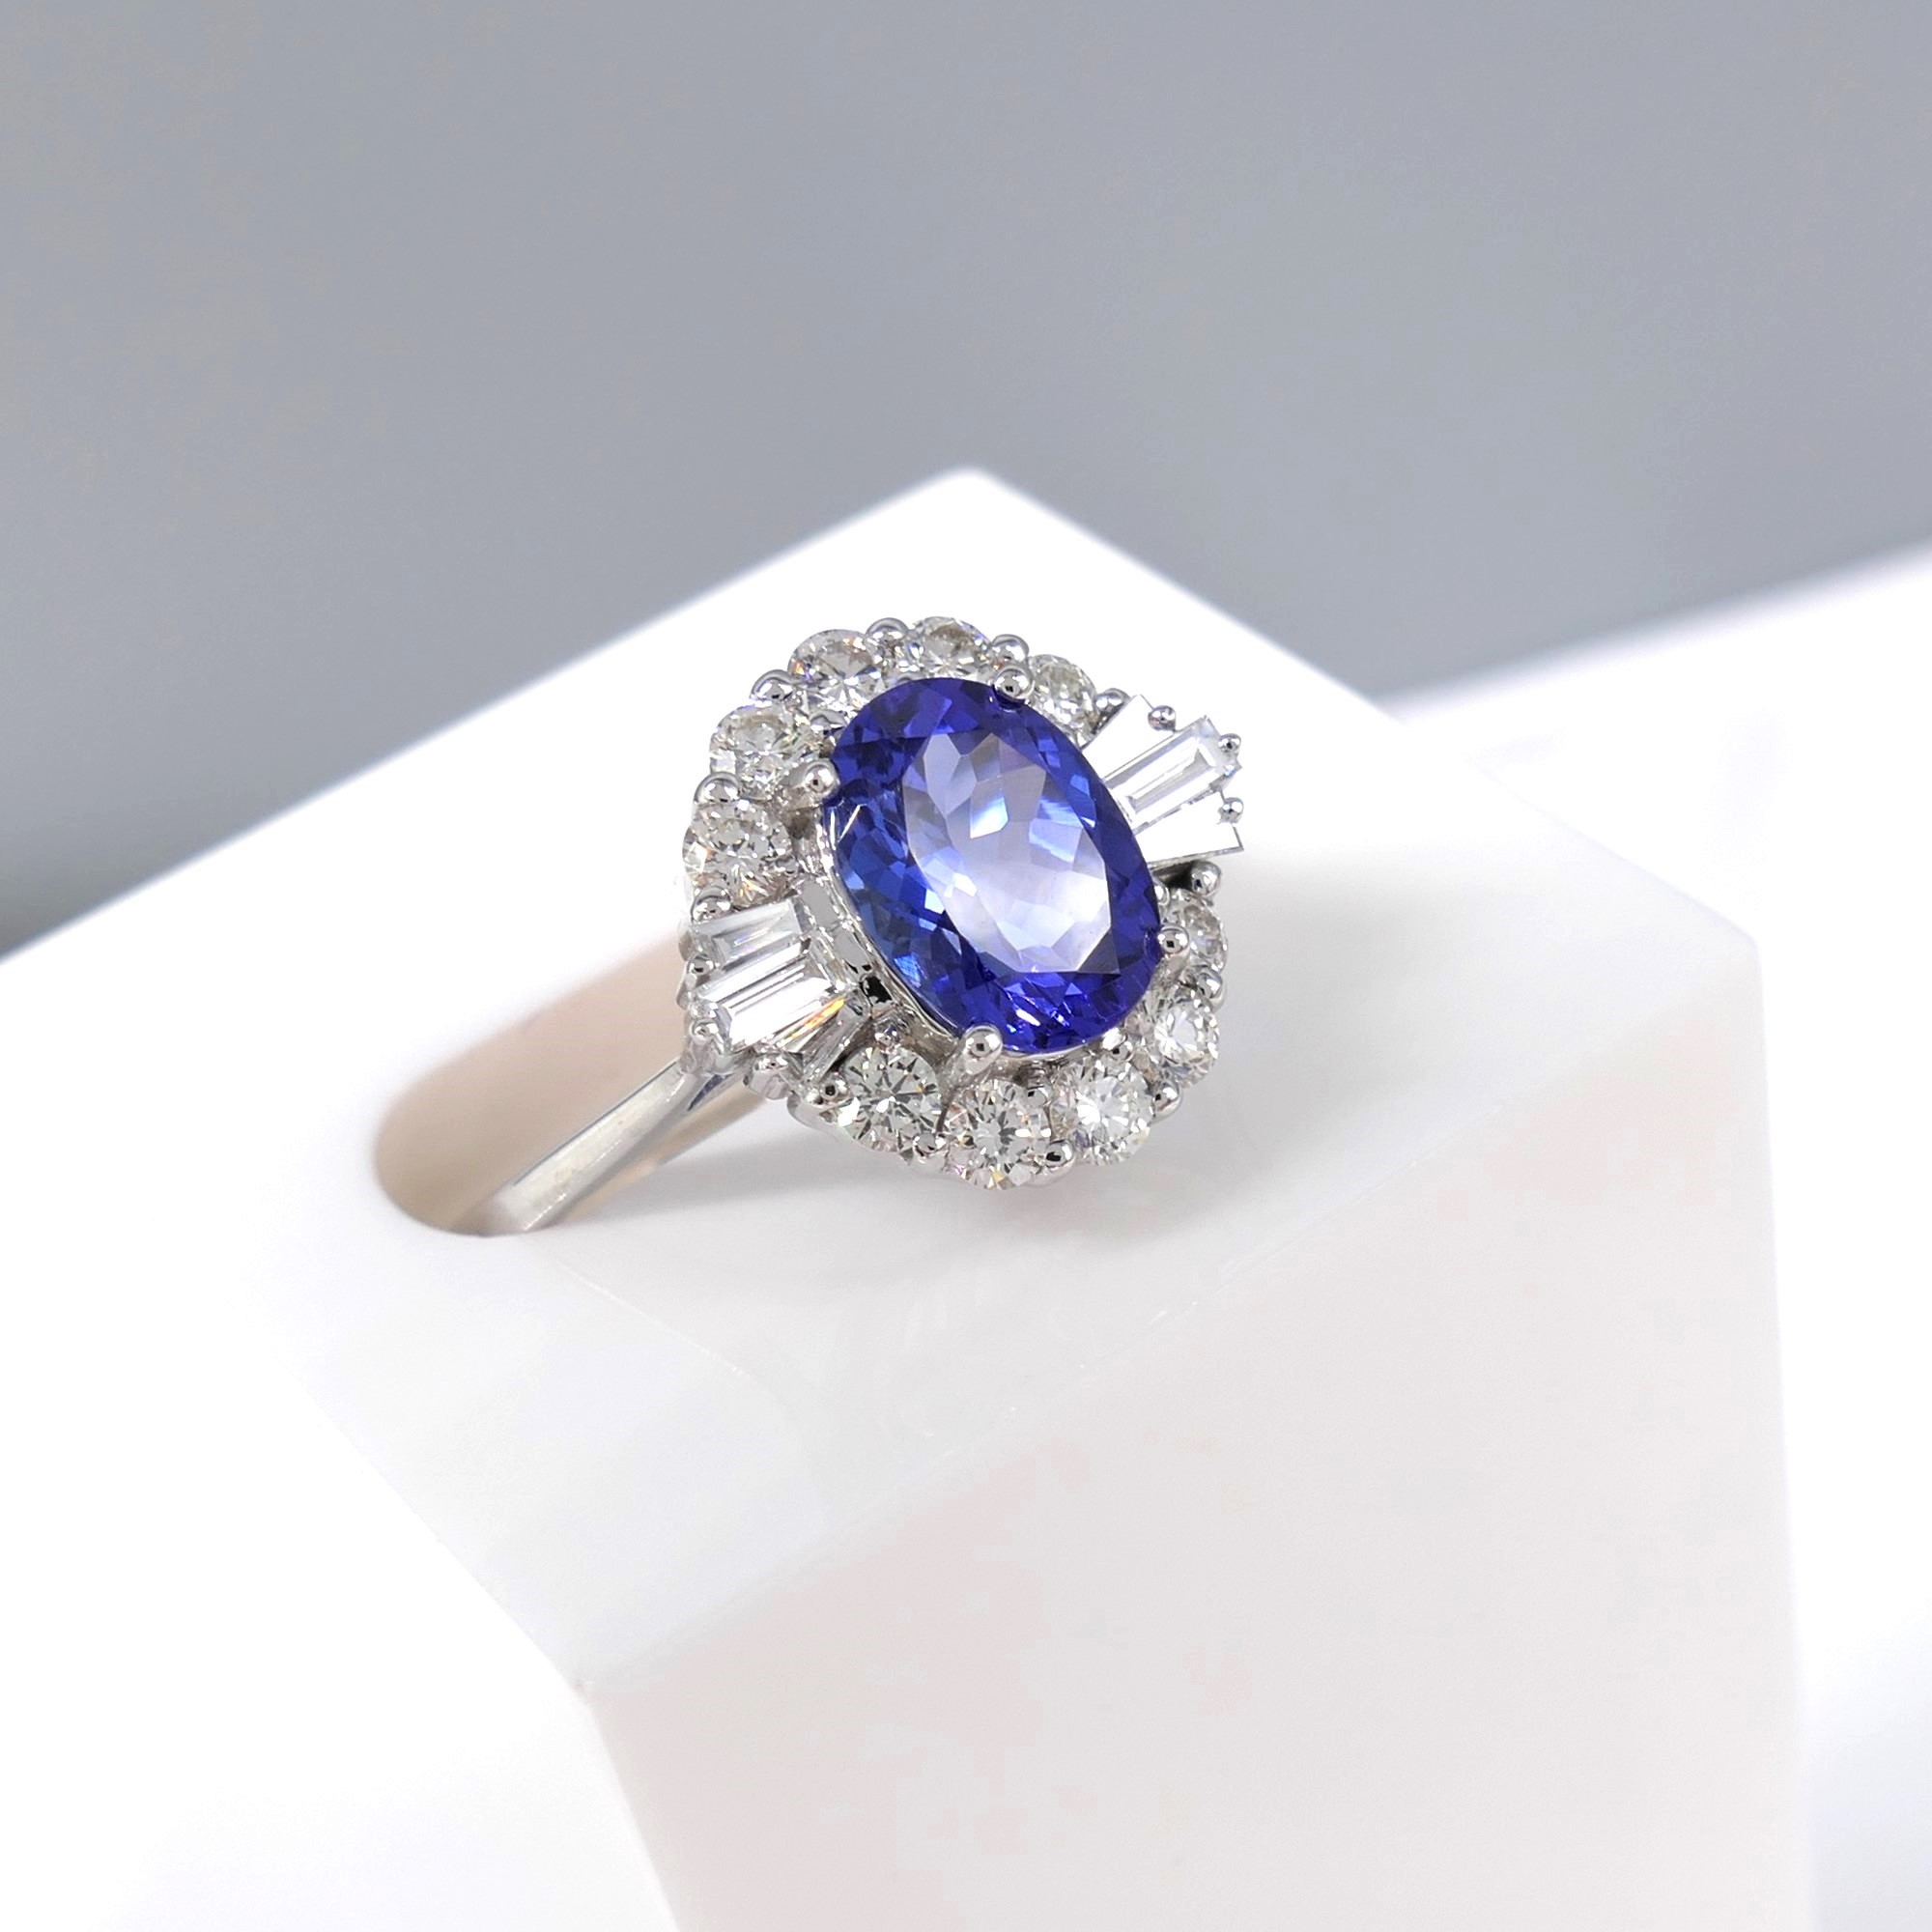 Stylish 1.37 Carat Tanzanite and 0.57 Carat Diamond Cluster Ring In 18ct White Gold - Image 3 of 7